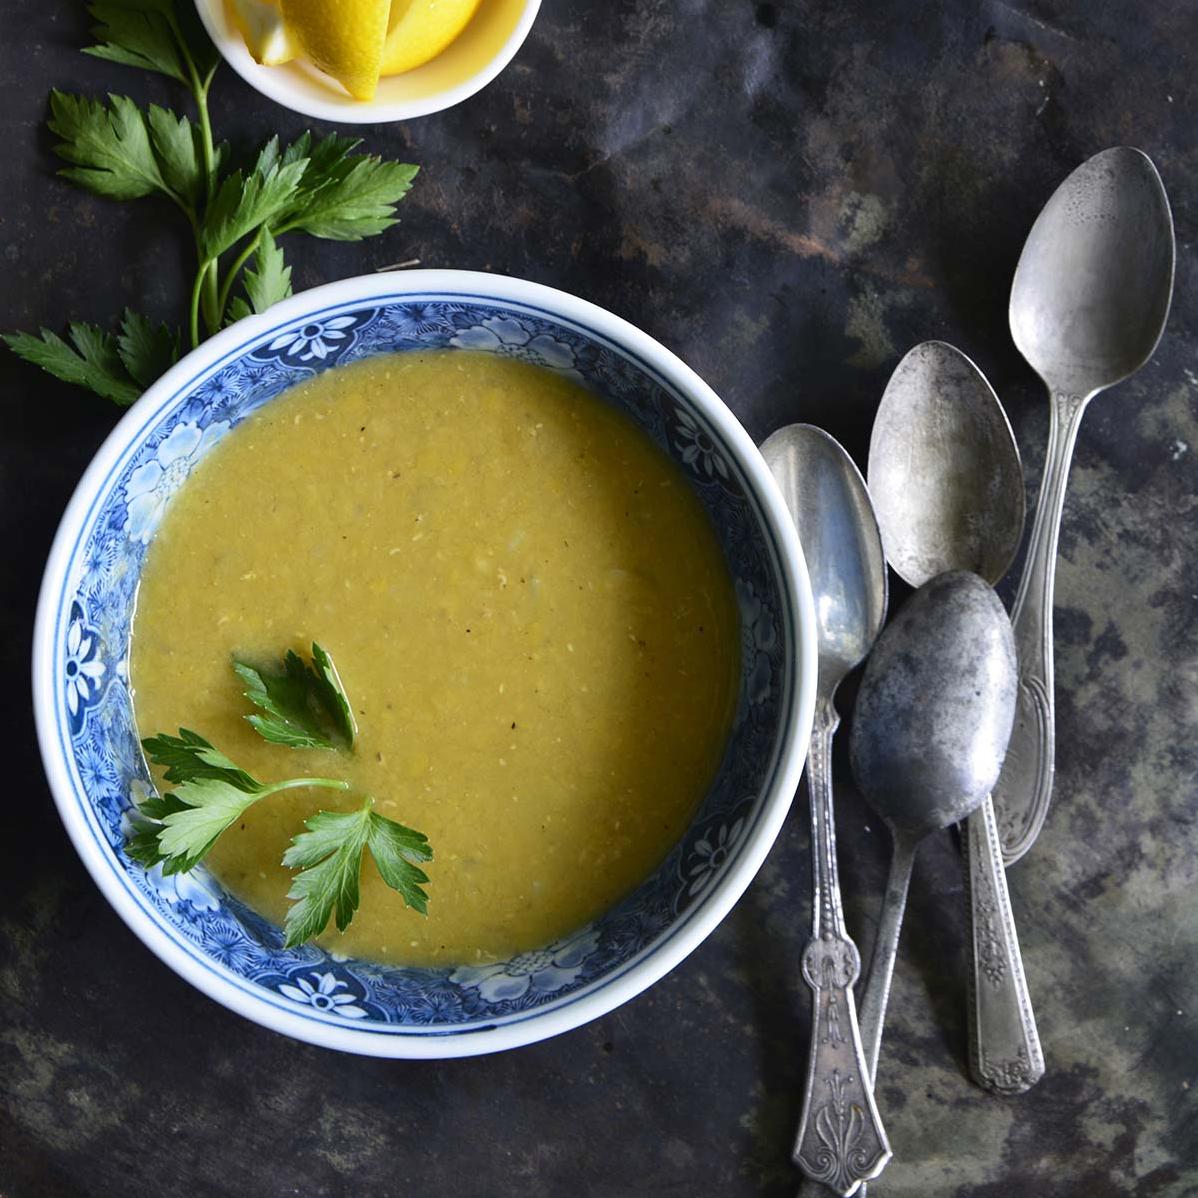  Satisfy your soup cravings with this delicious recipe